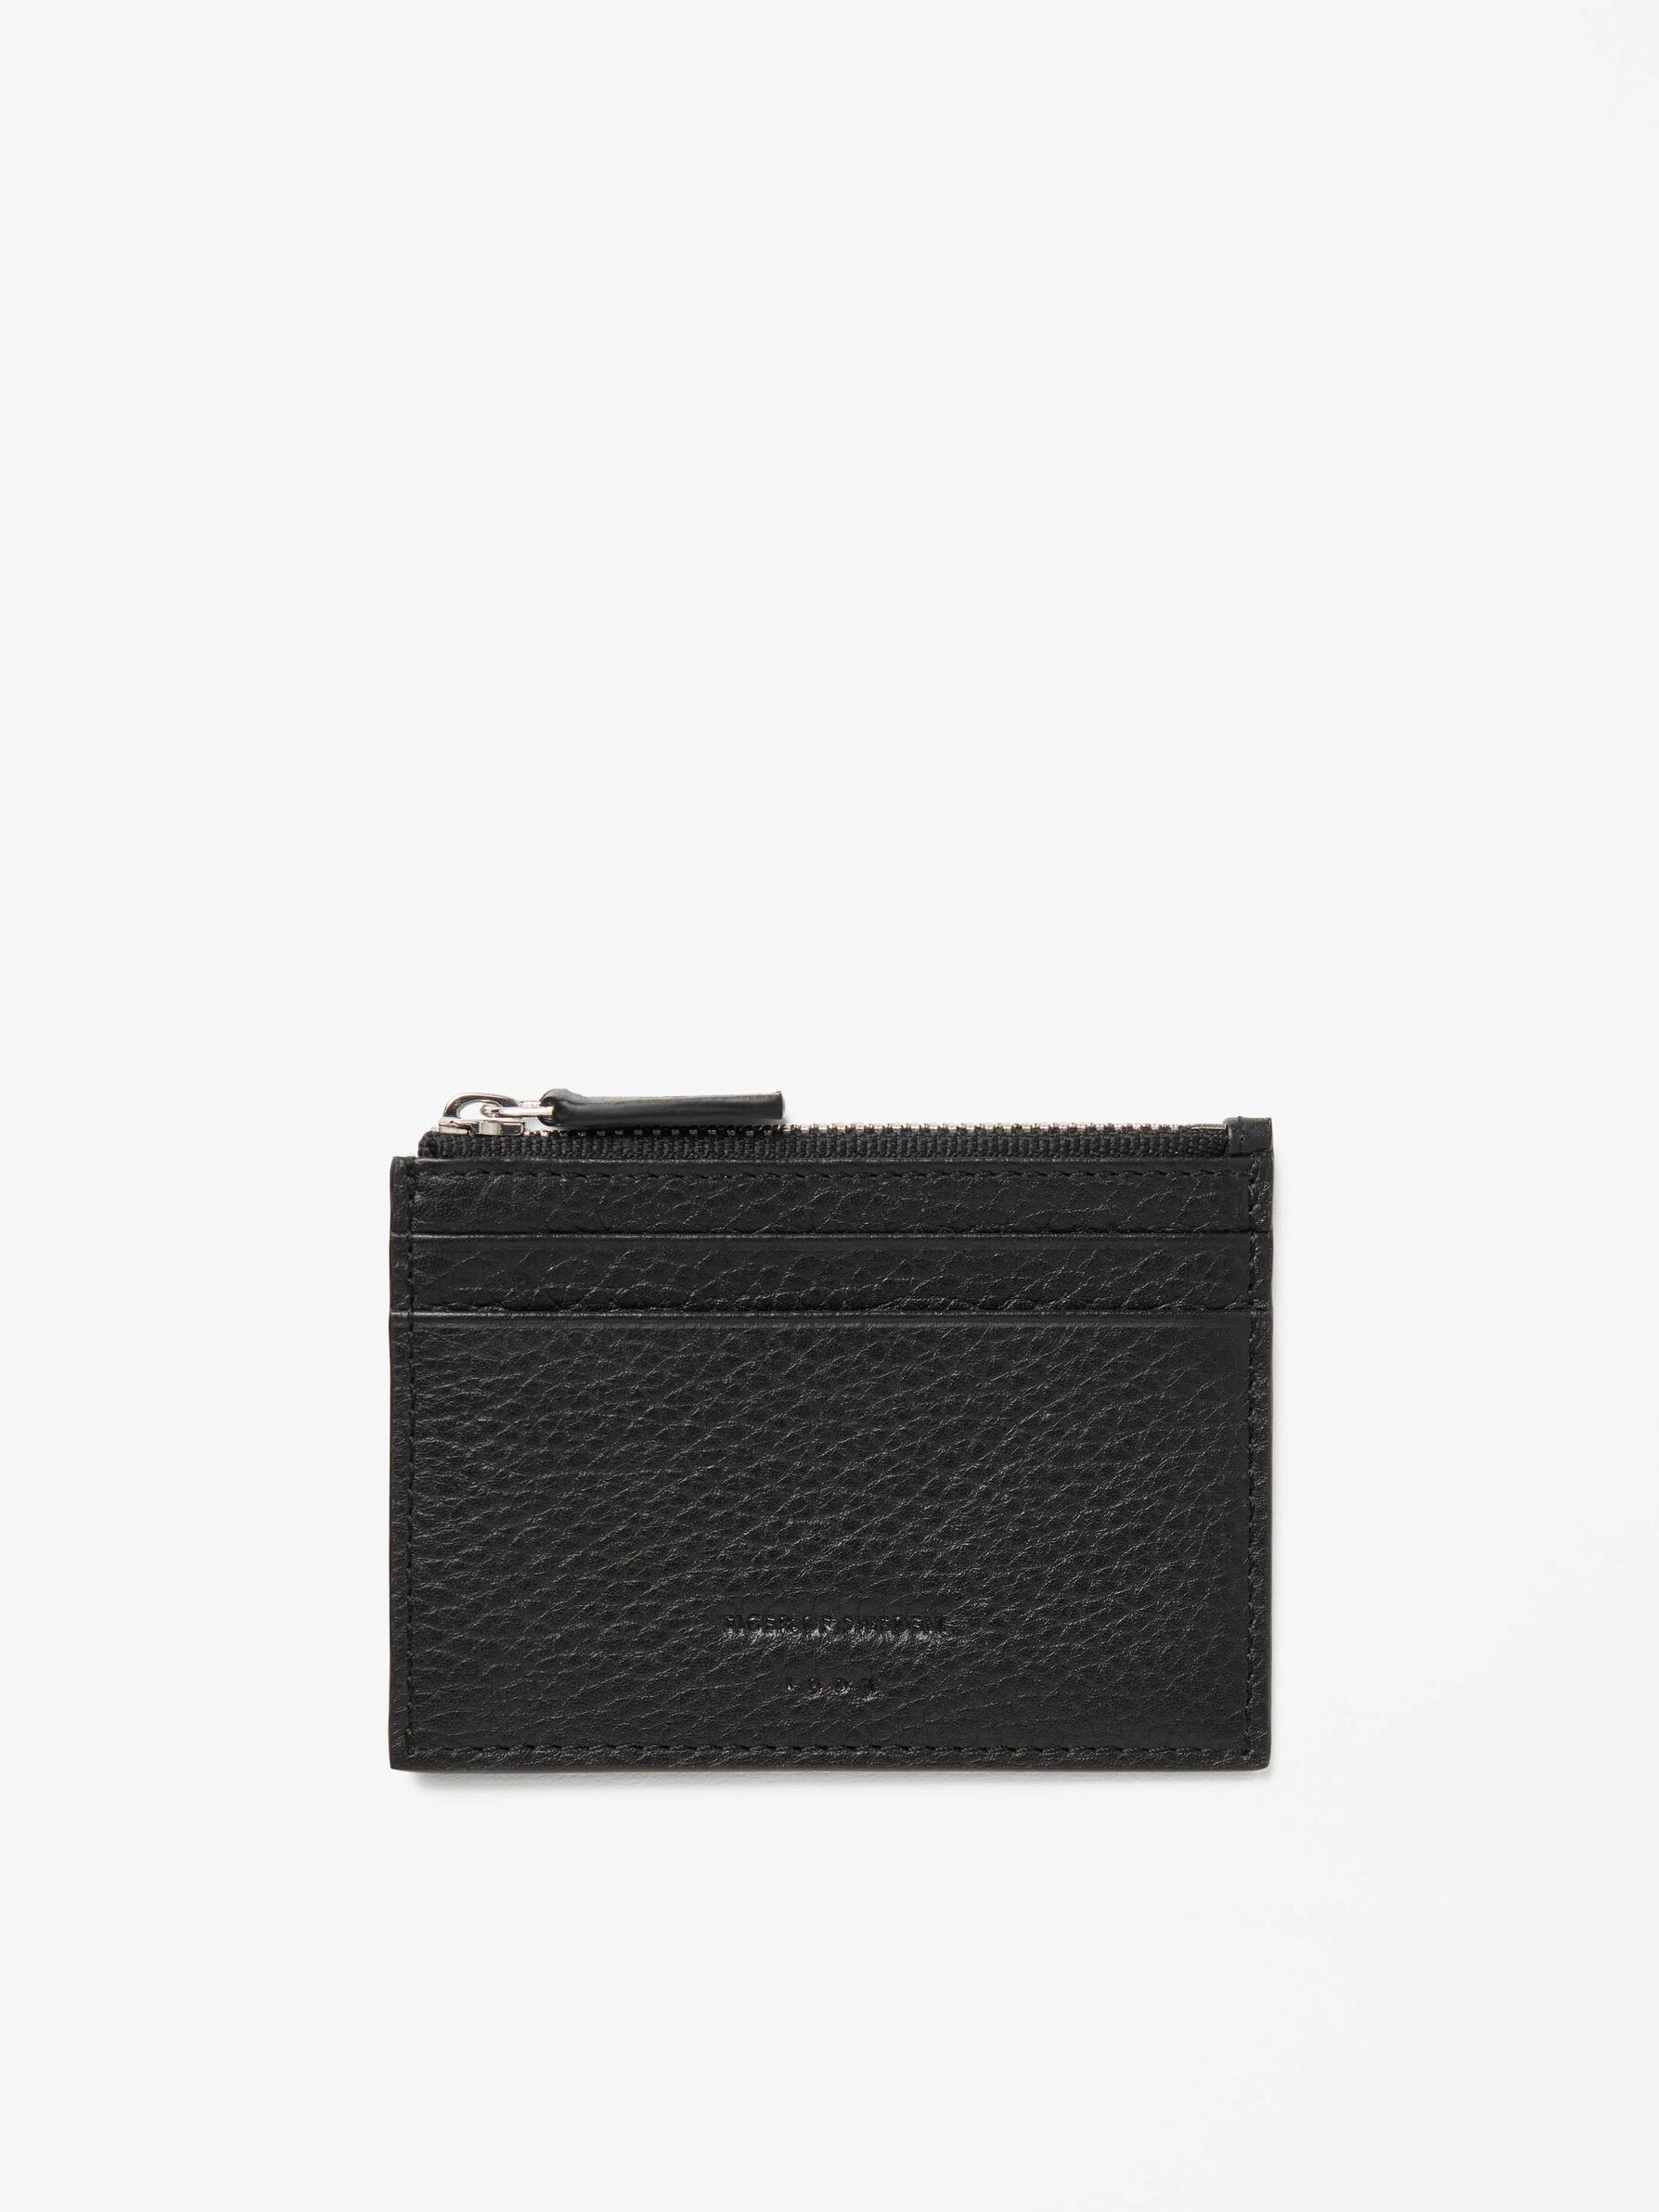 Tiger of Sweden Wahren Wallet T70332101 Black Grainy Leather |  Shop from eightywingold an official brand partner for Tiger of Sweden Canada and US